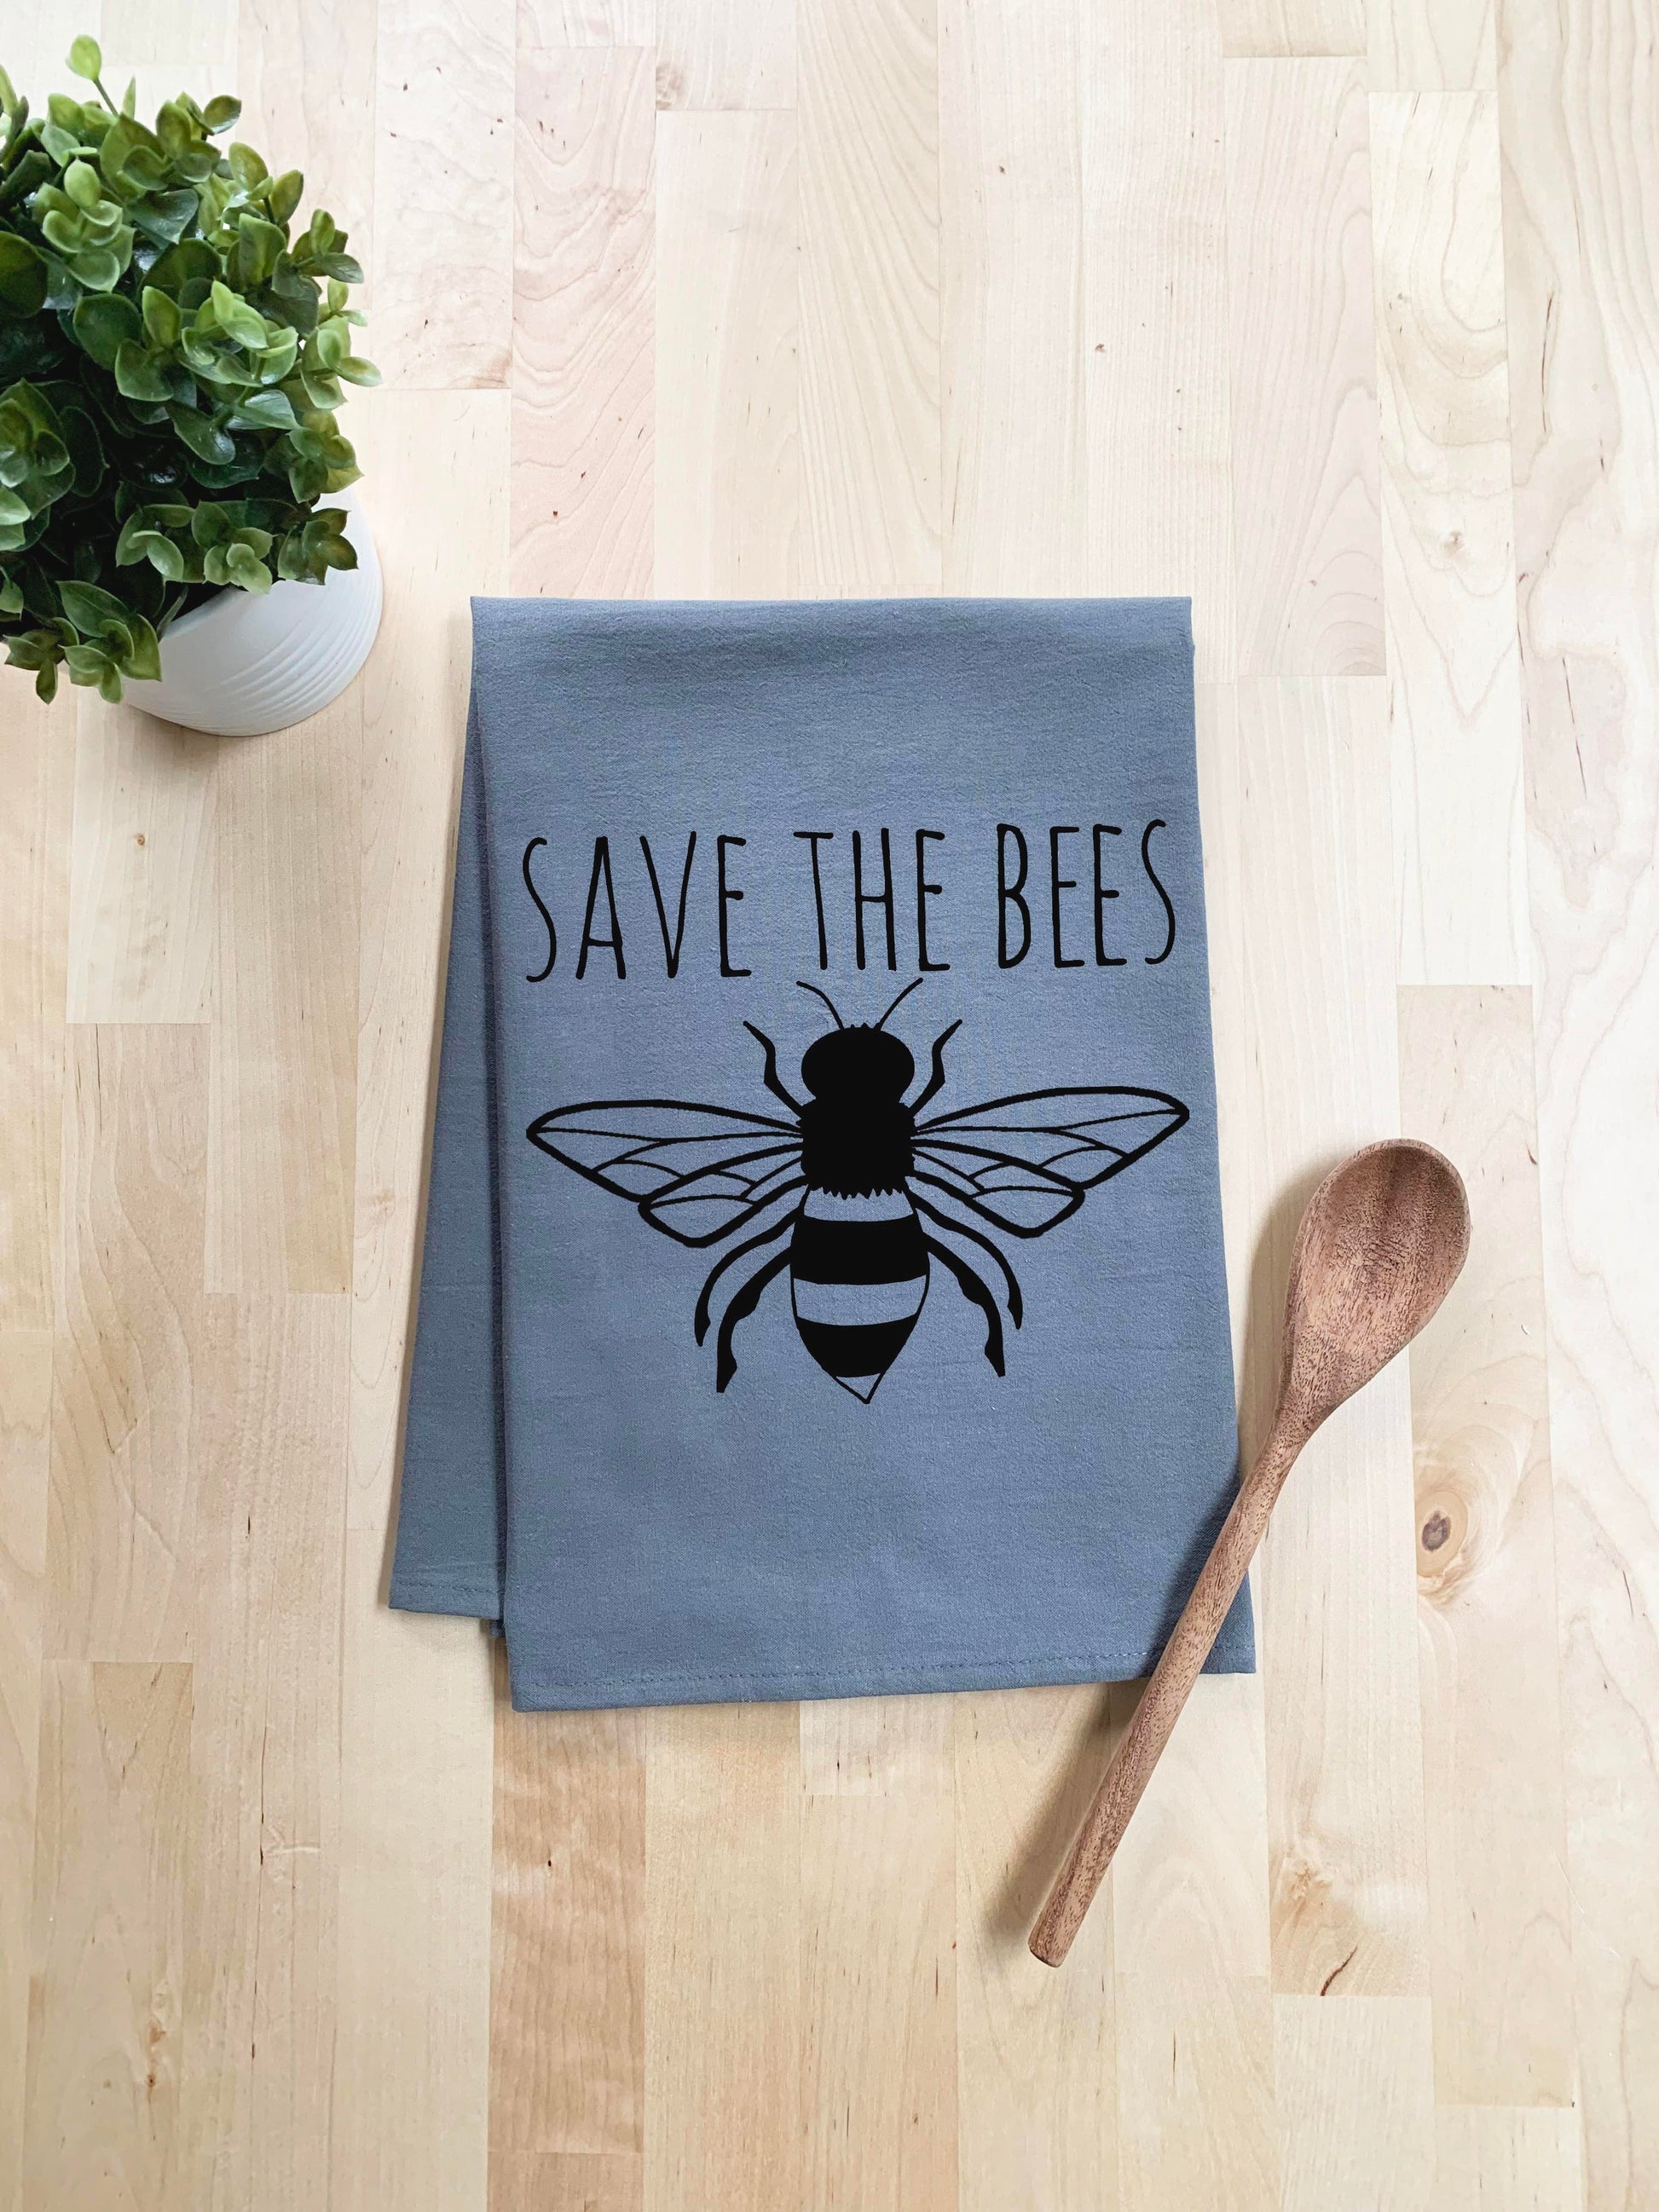 Save The Bees Dish Towel - White Or Gray - MoonlightMakers